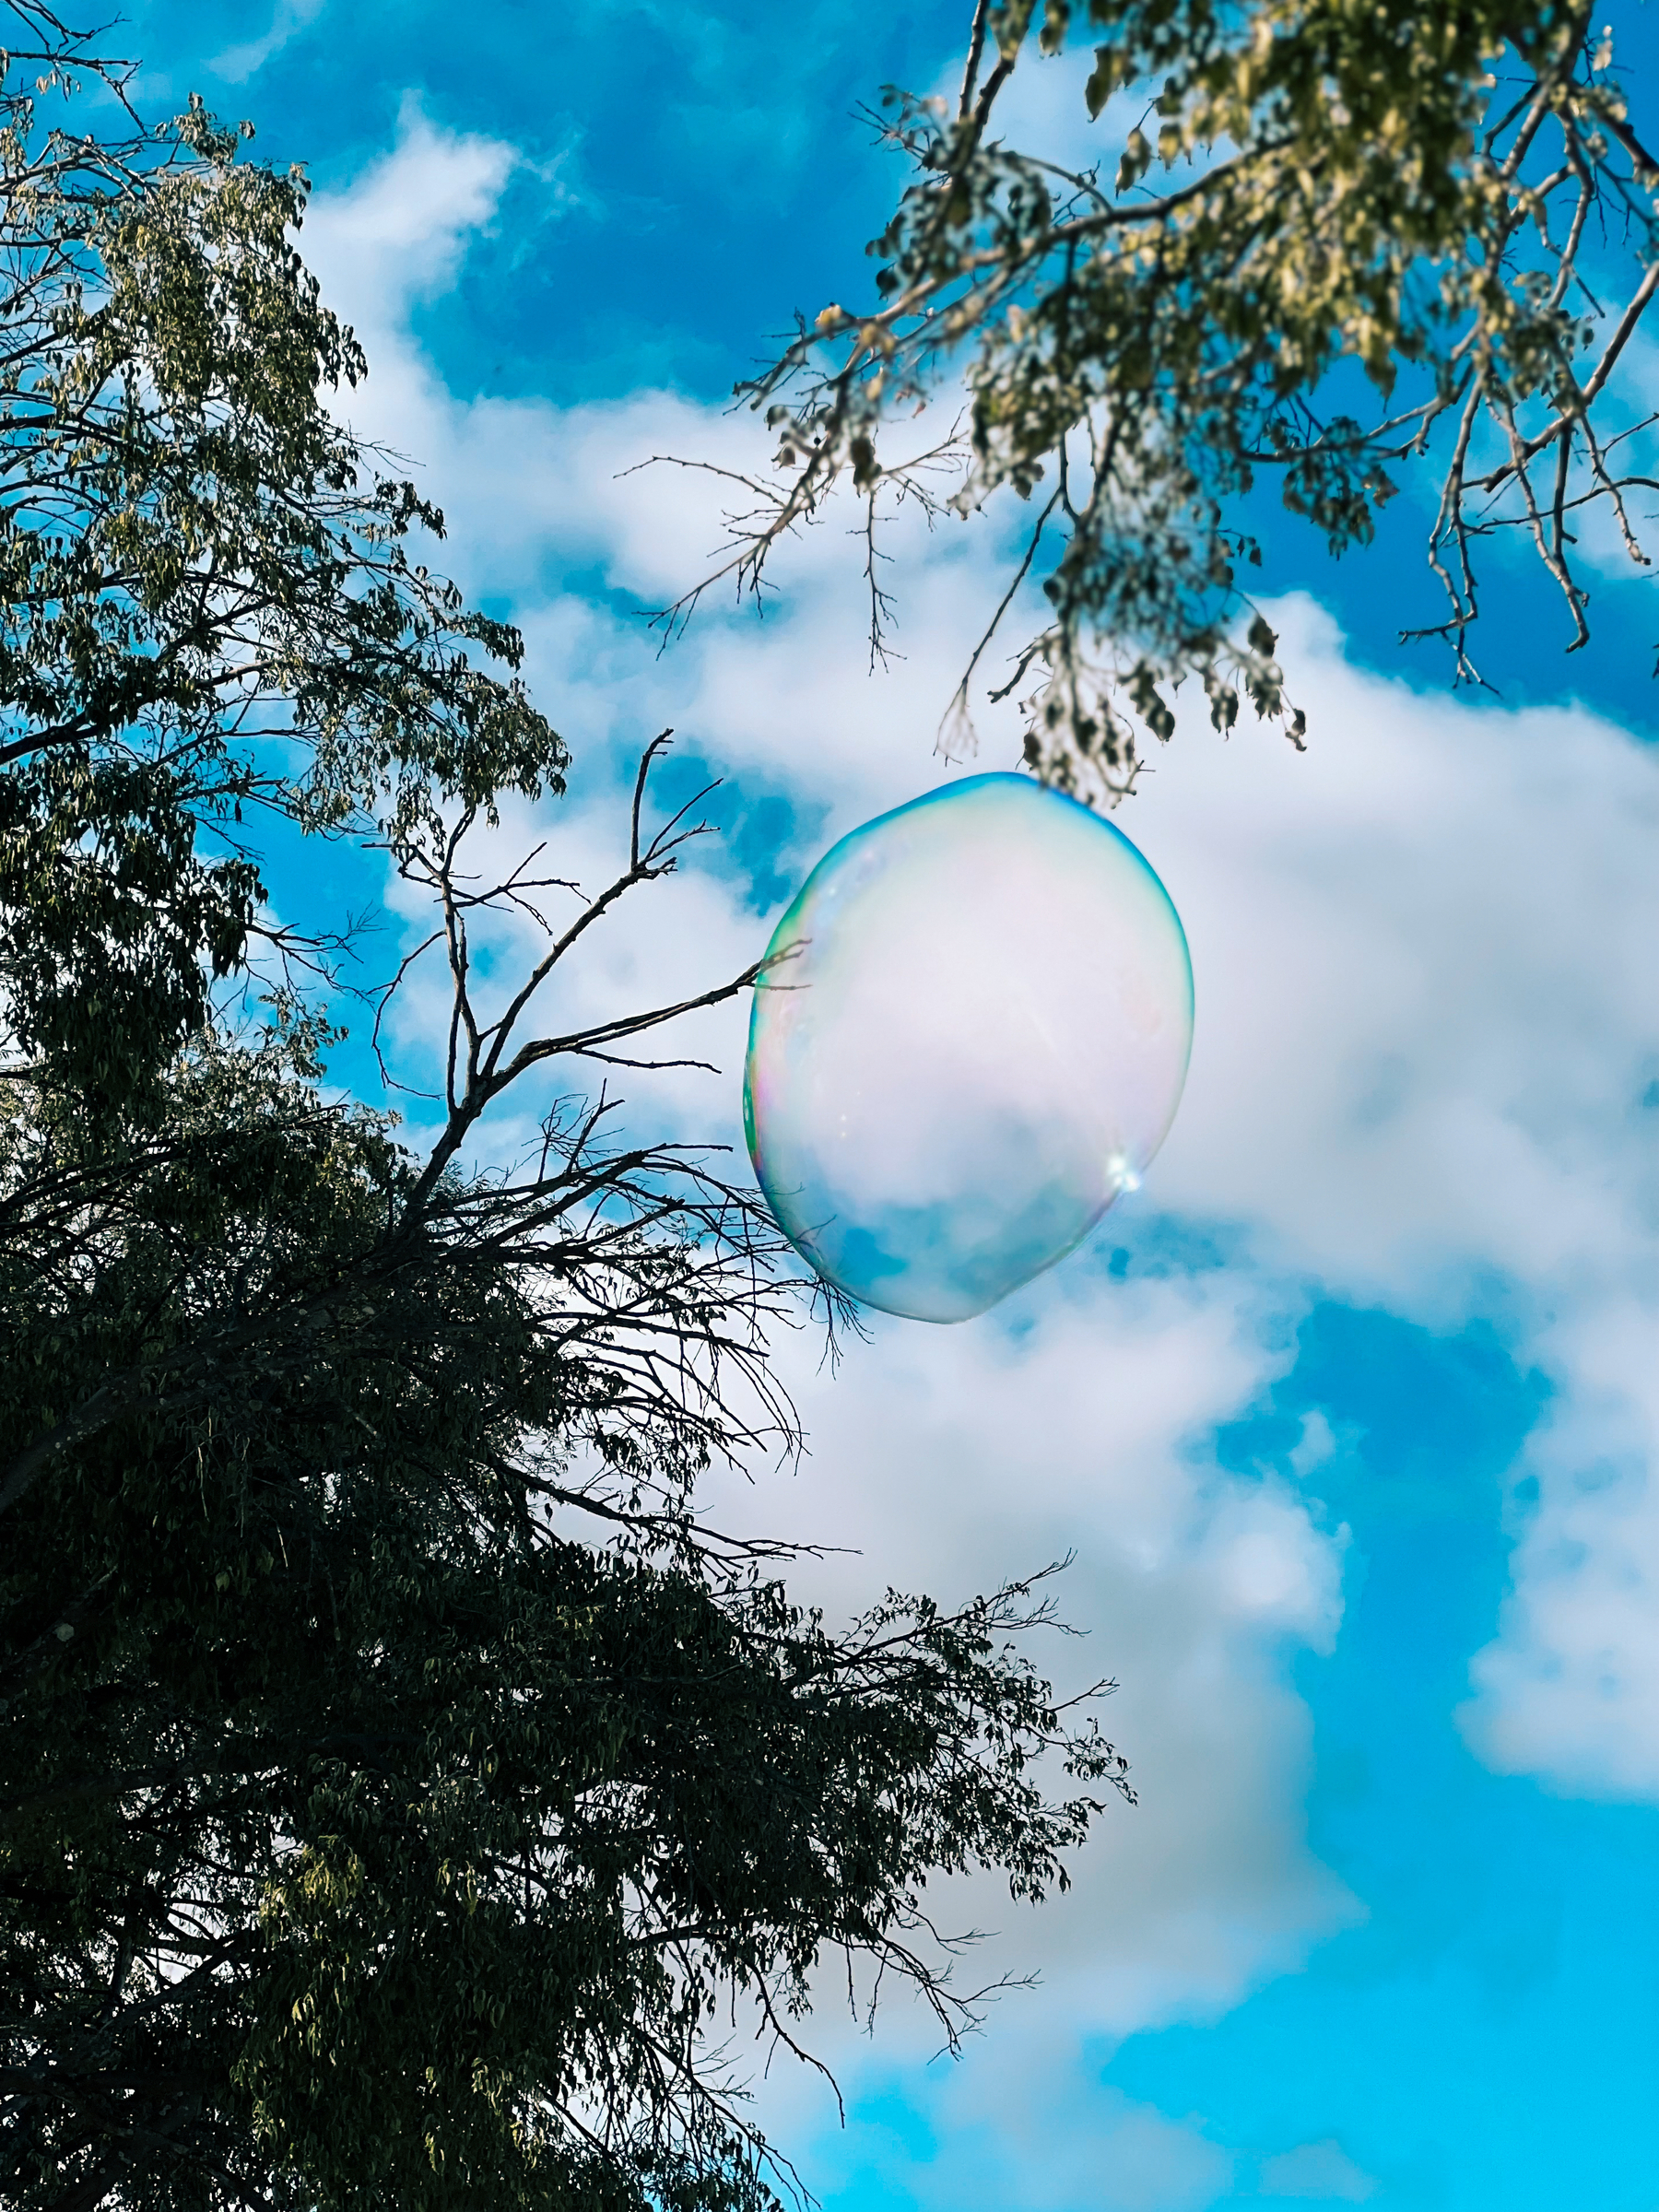 Soap bubble flying through the air.